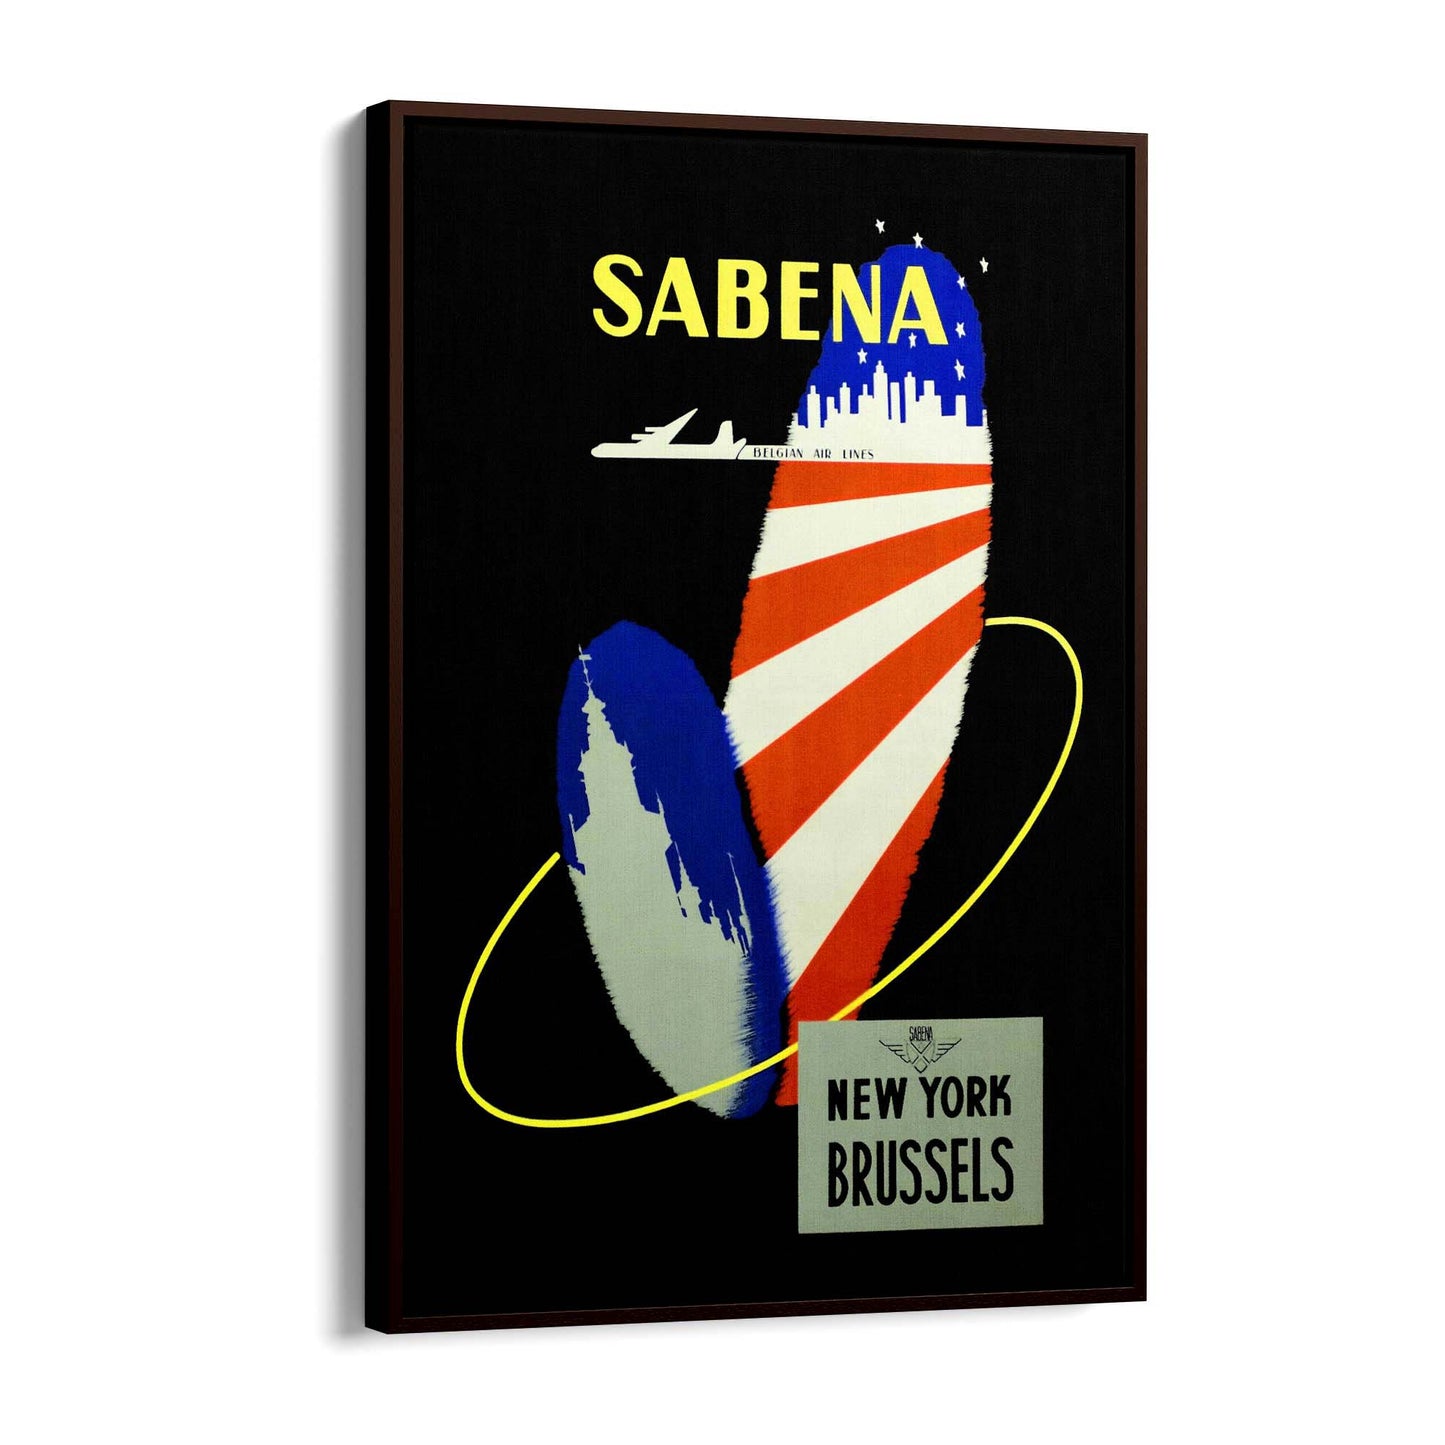 New York by Sabena Airlines Vintage Travel Advert Wall Art - The Affordable Art Company